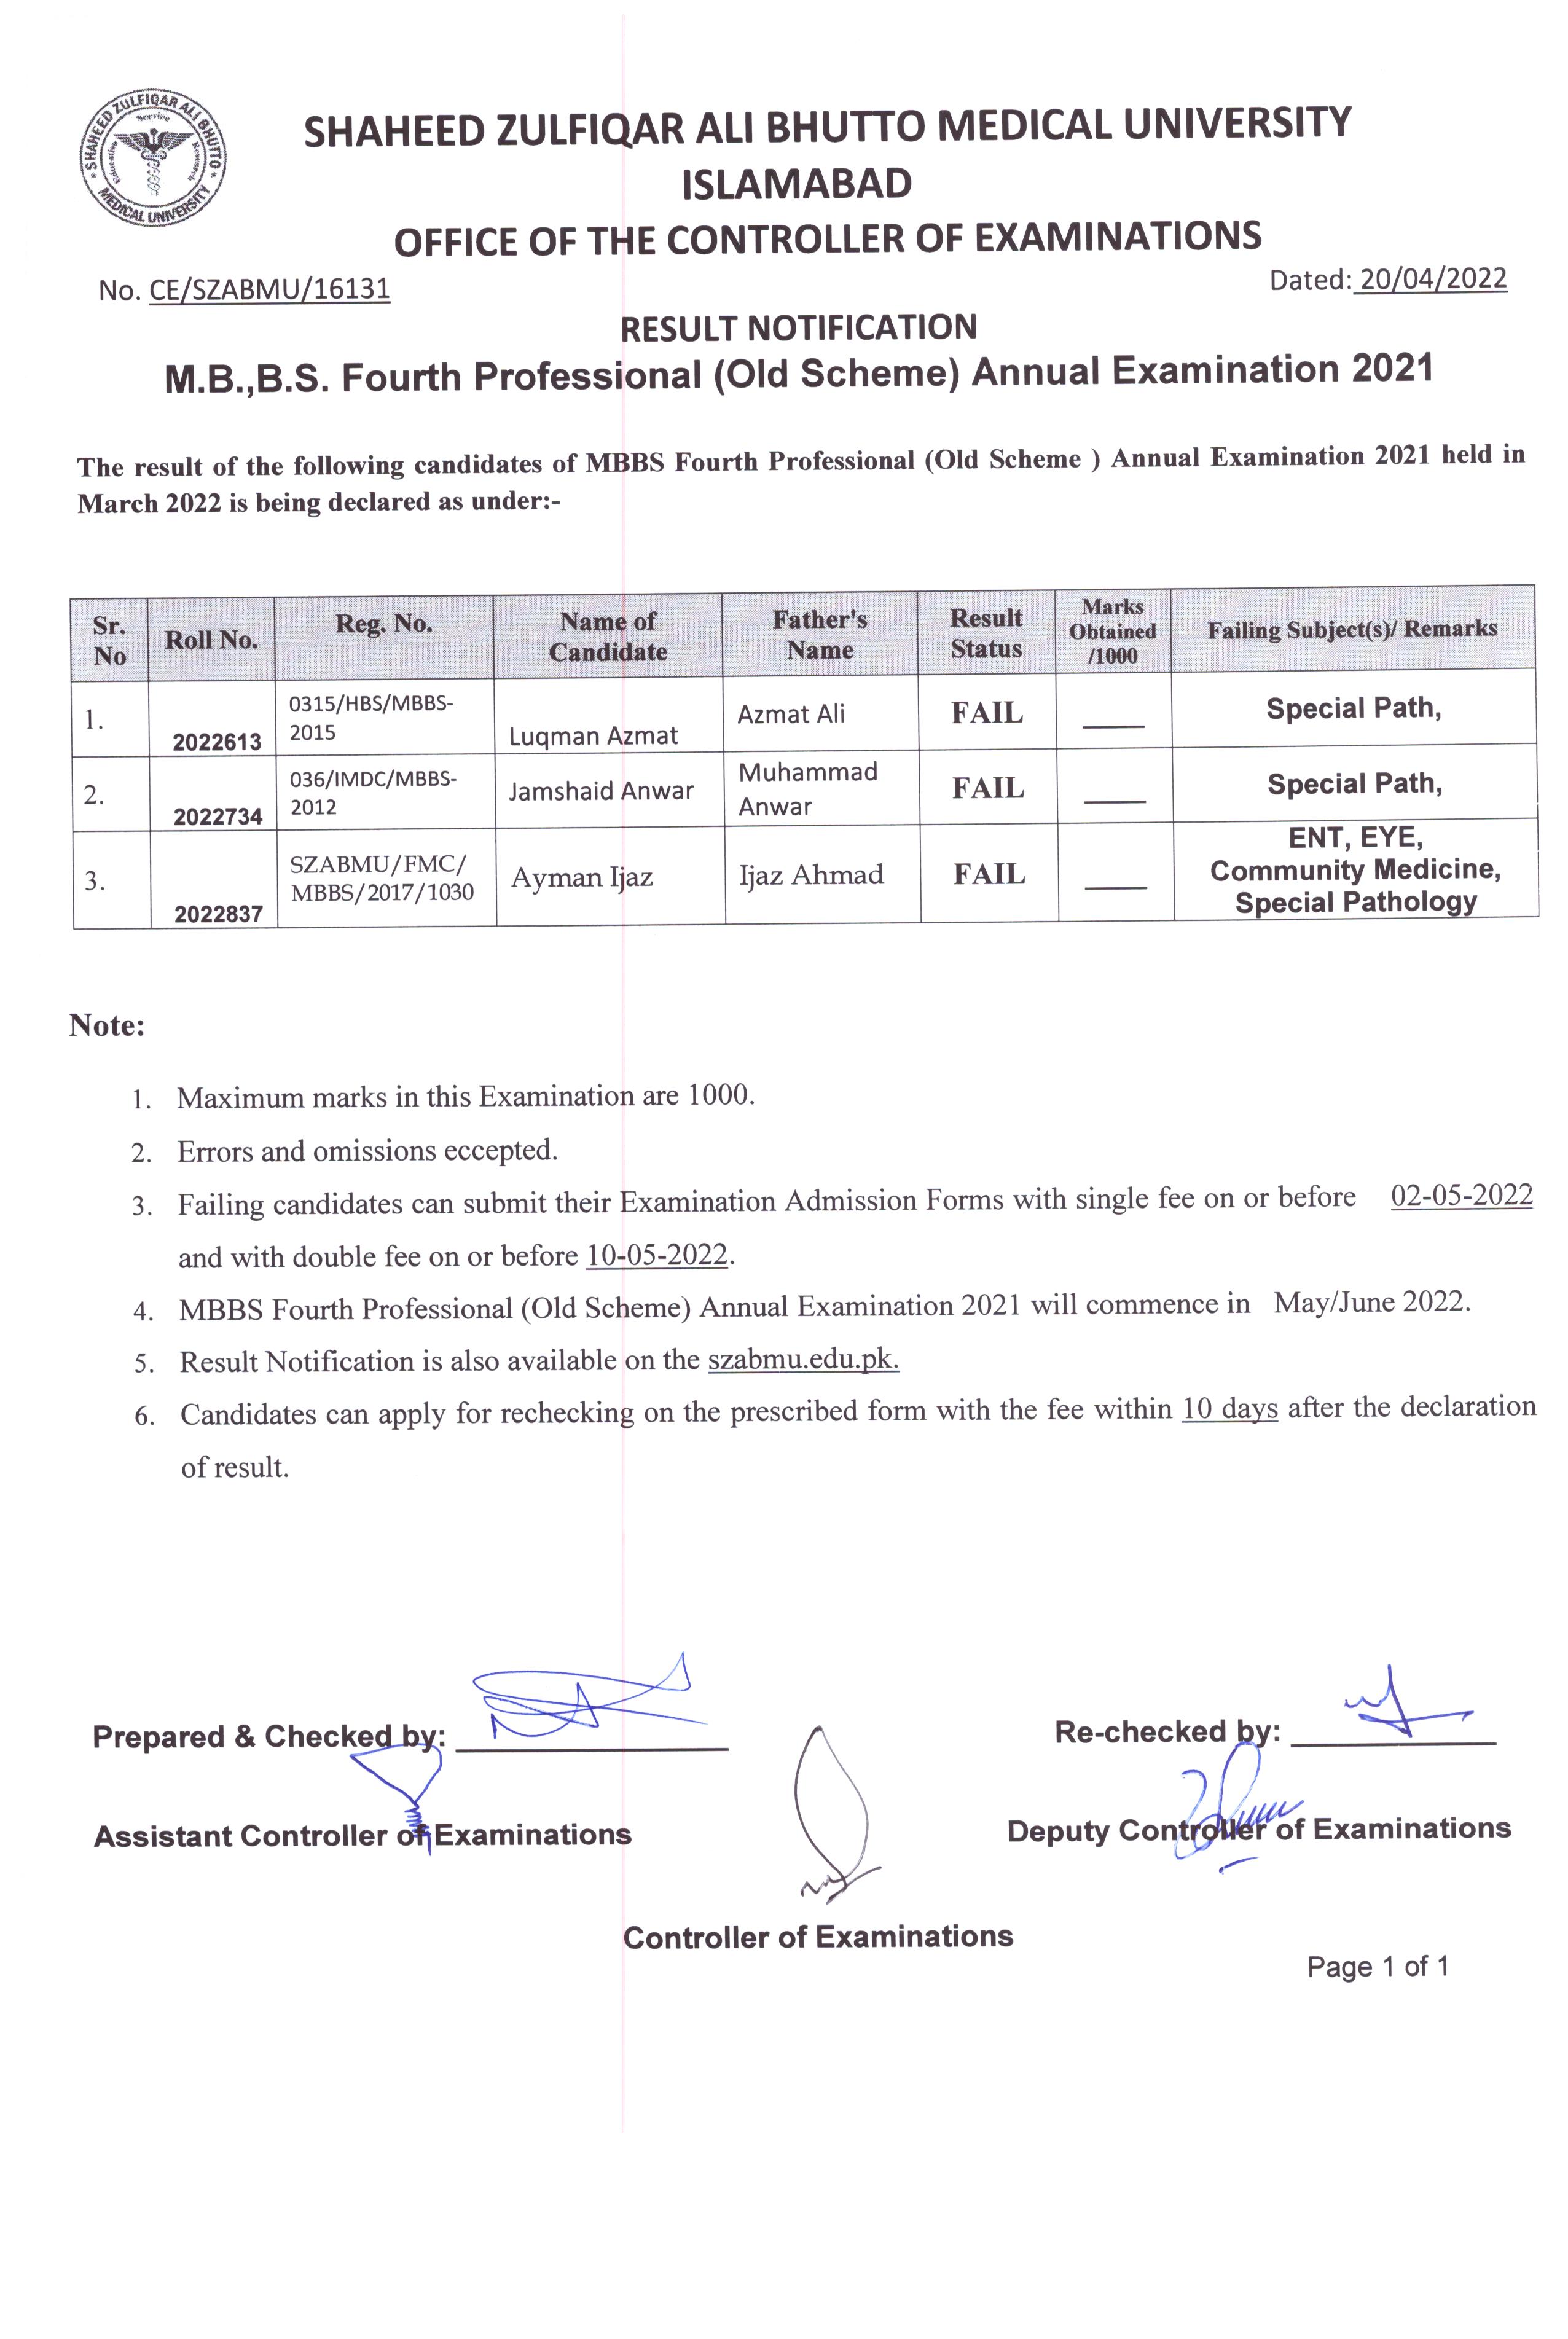 Result Notification - MBBS Fourth Professional (Old Scheme) Annual Examination 2021